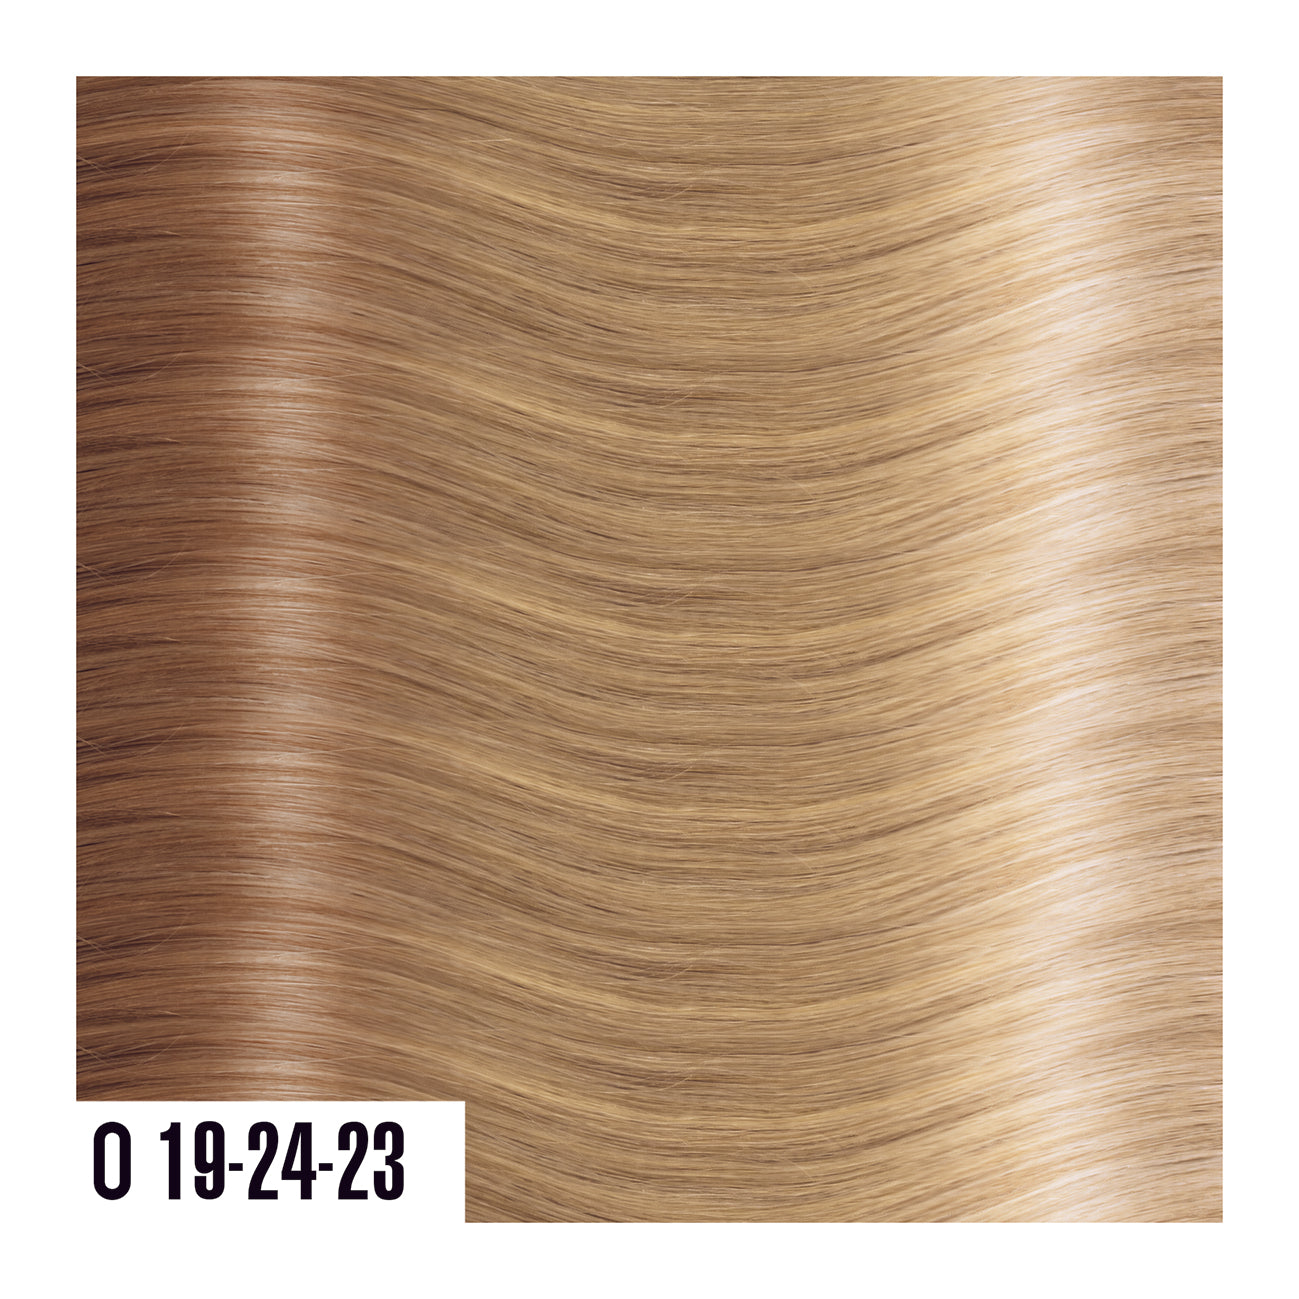 O19-24-23 - Prime Tape In - Light Brown Fade Into Blonde - Ombre colors are a beautiful gradual blend of 3 colors with darker roots and lighter ends. 